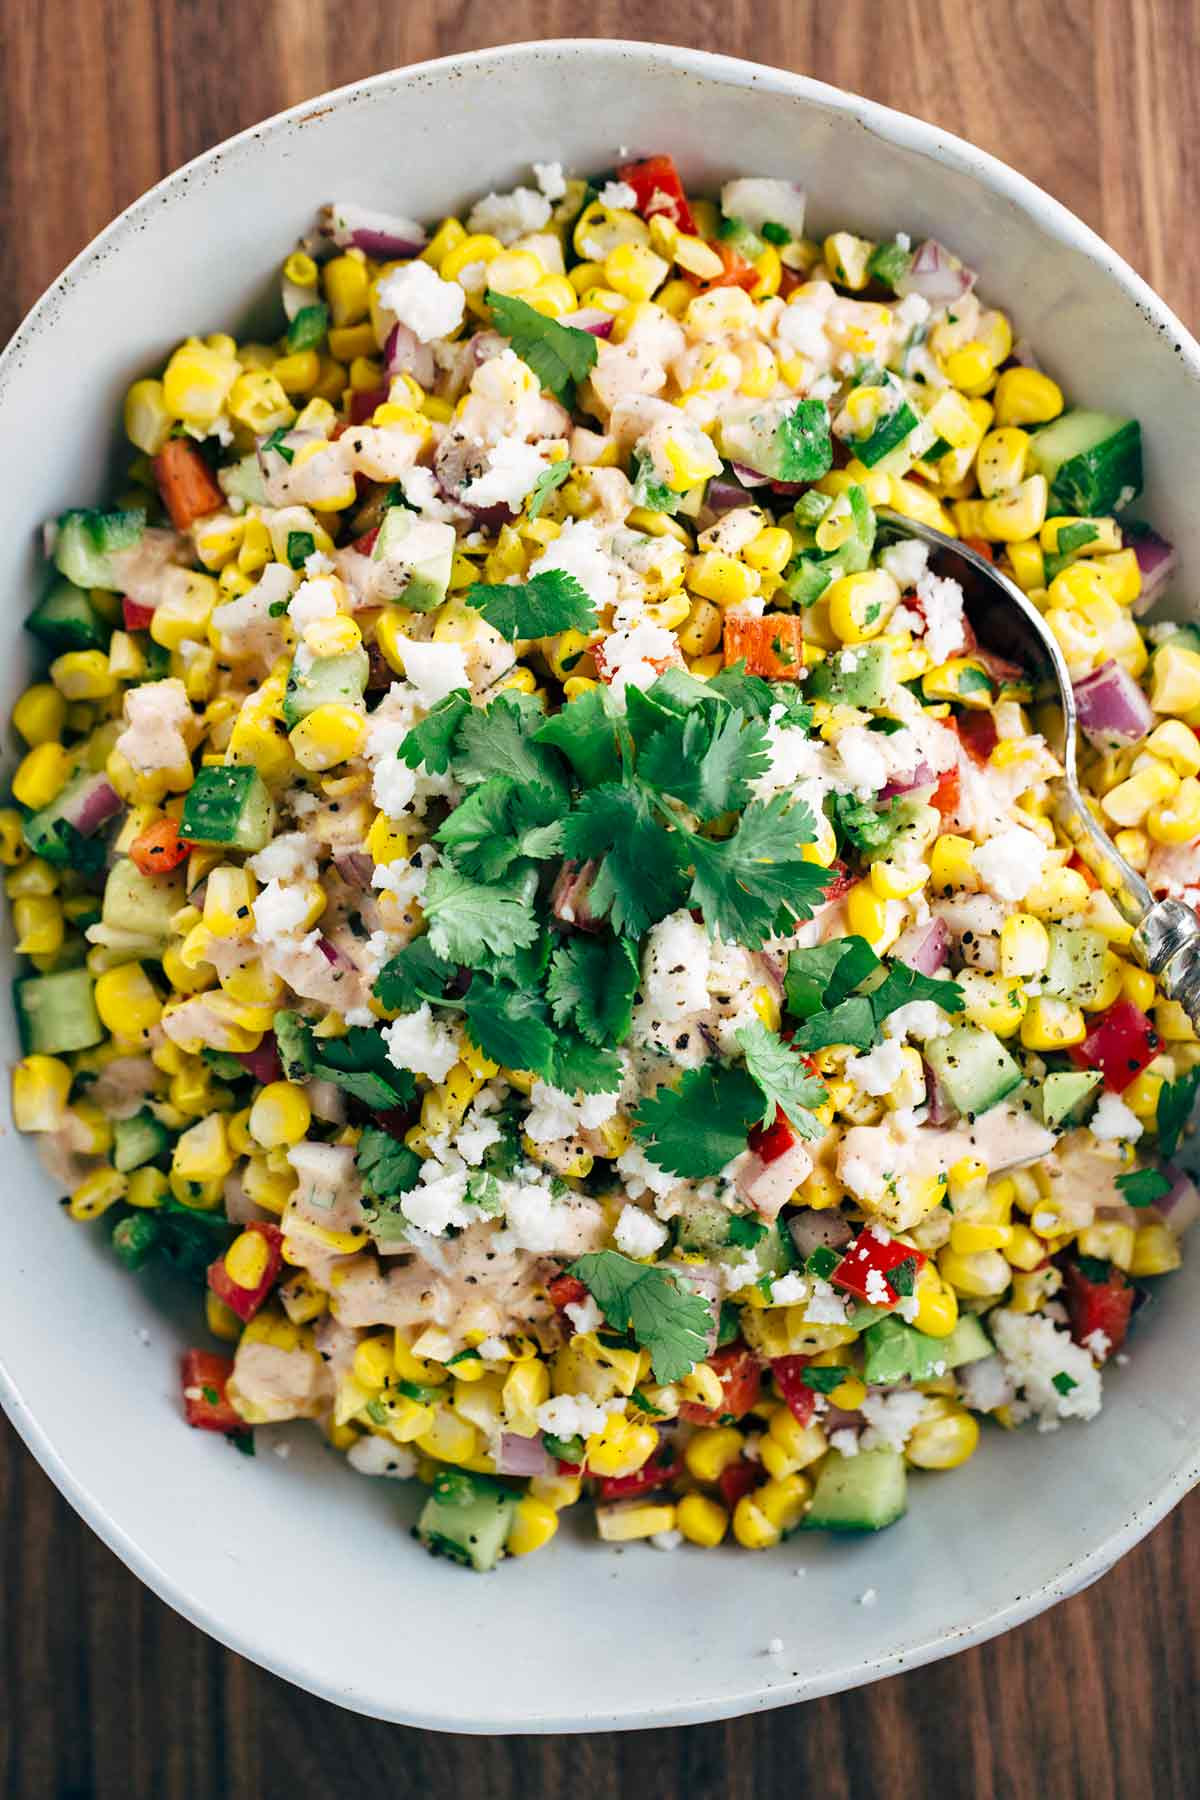 Mexican Street Corn Salad
 Mexican Street Corn Salad with Chipotle Dressing